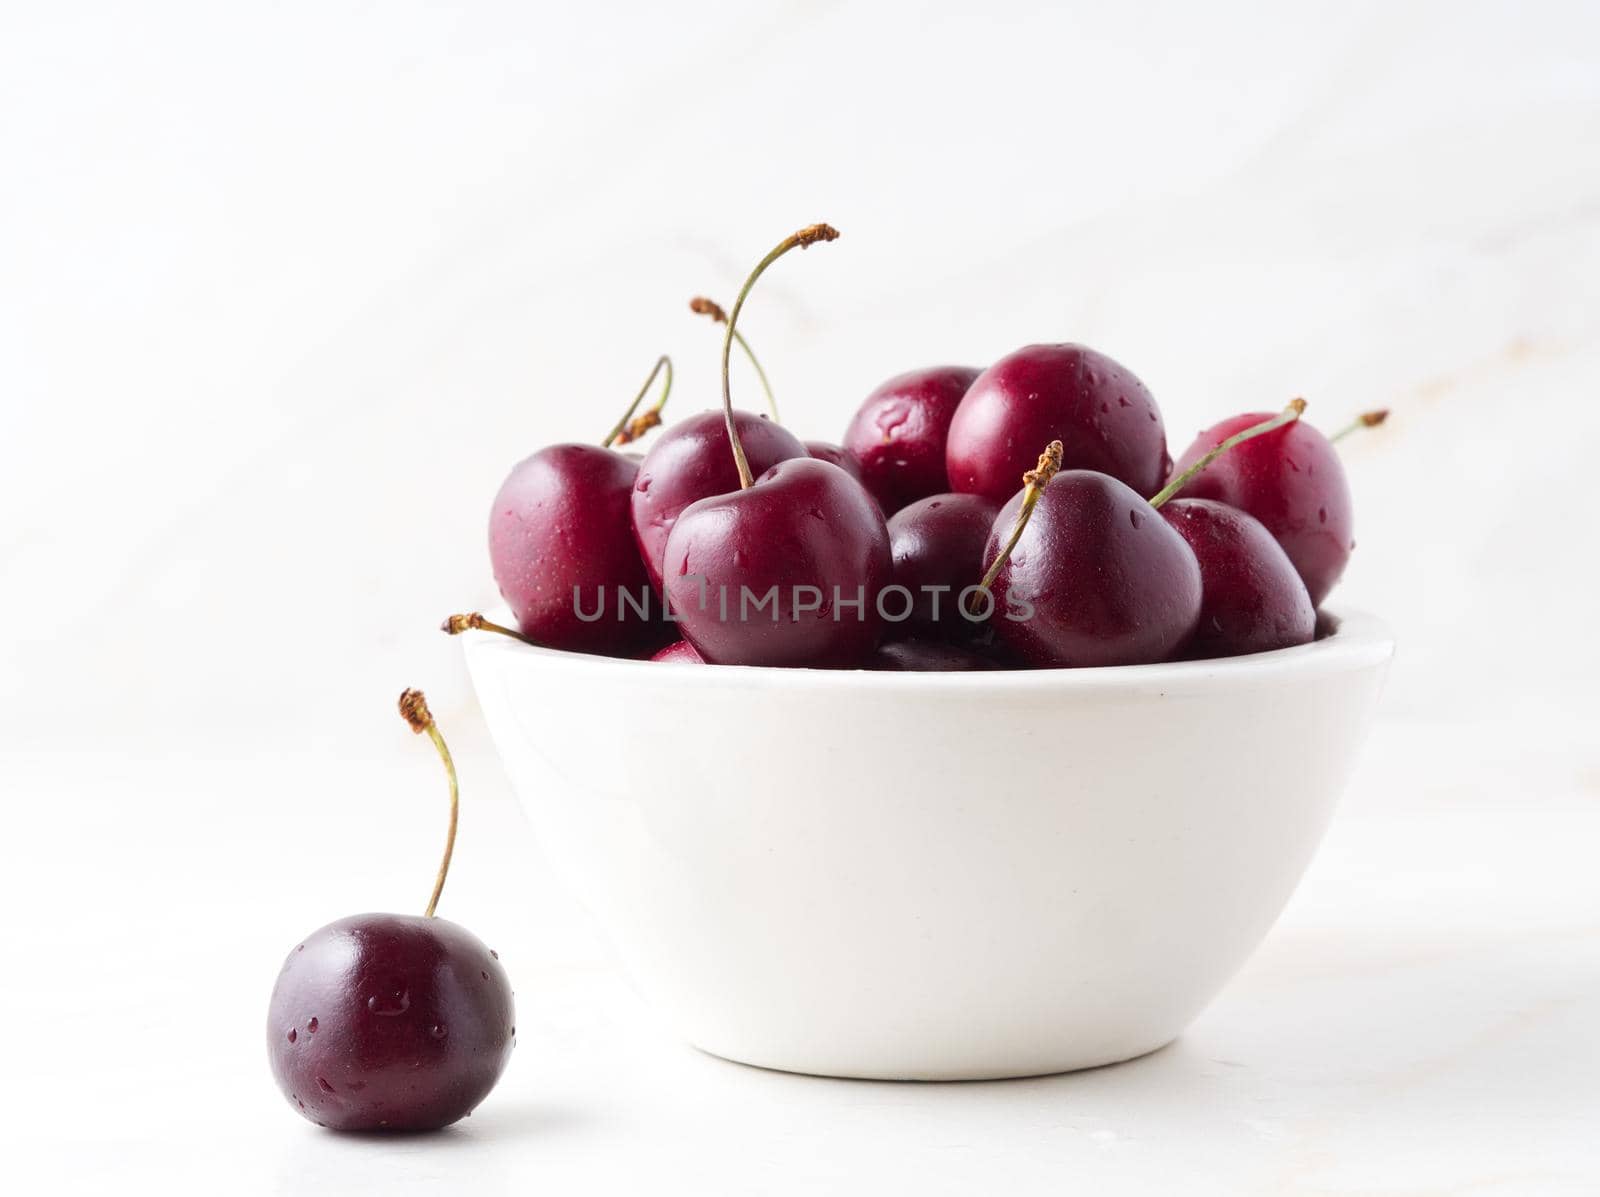 The red dark sweet cherries in white bowl on stone white table, side view.